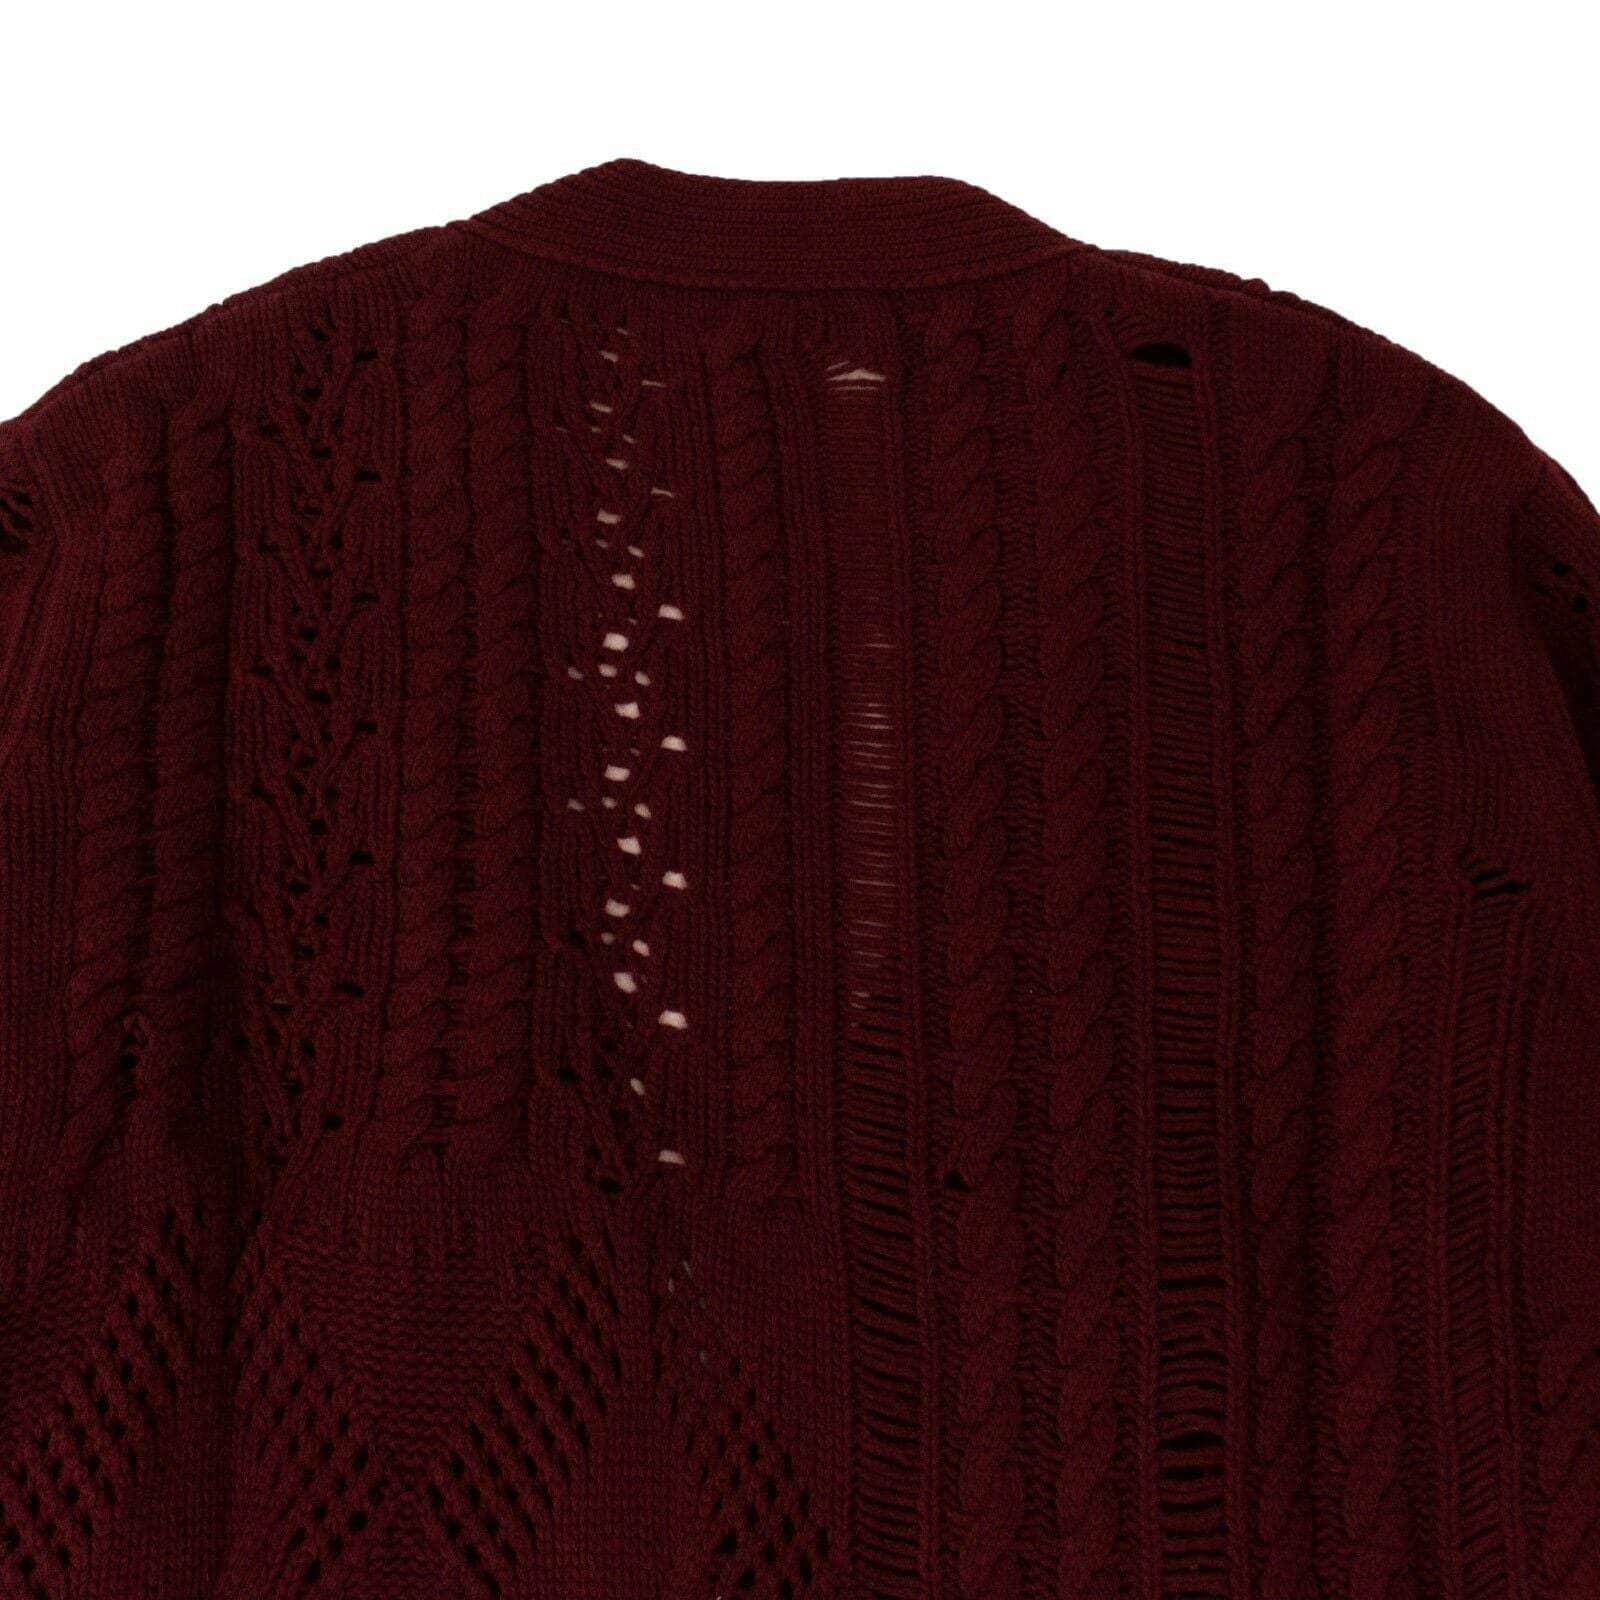 Amiri 1000-2000, amiri, channelenable-all, chicmi, couponcollection, gender-mens, main-clothing, size-l, size-m, size-s, size-xl Men's Burgundy Oversized Multipoint Cardigan Sweater